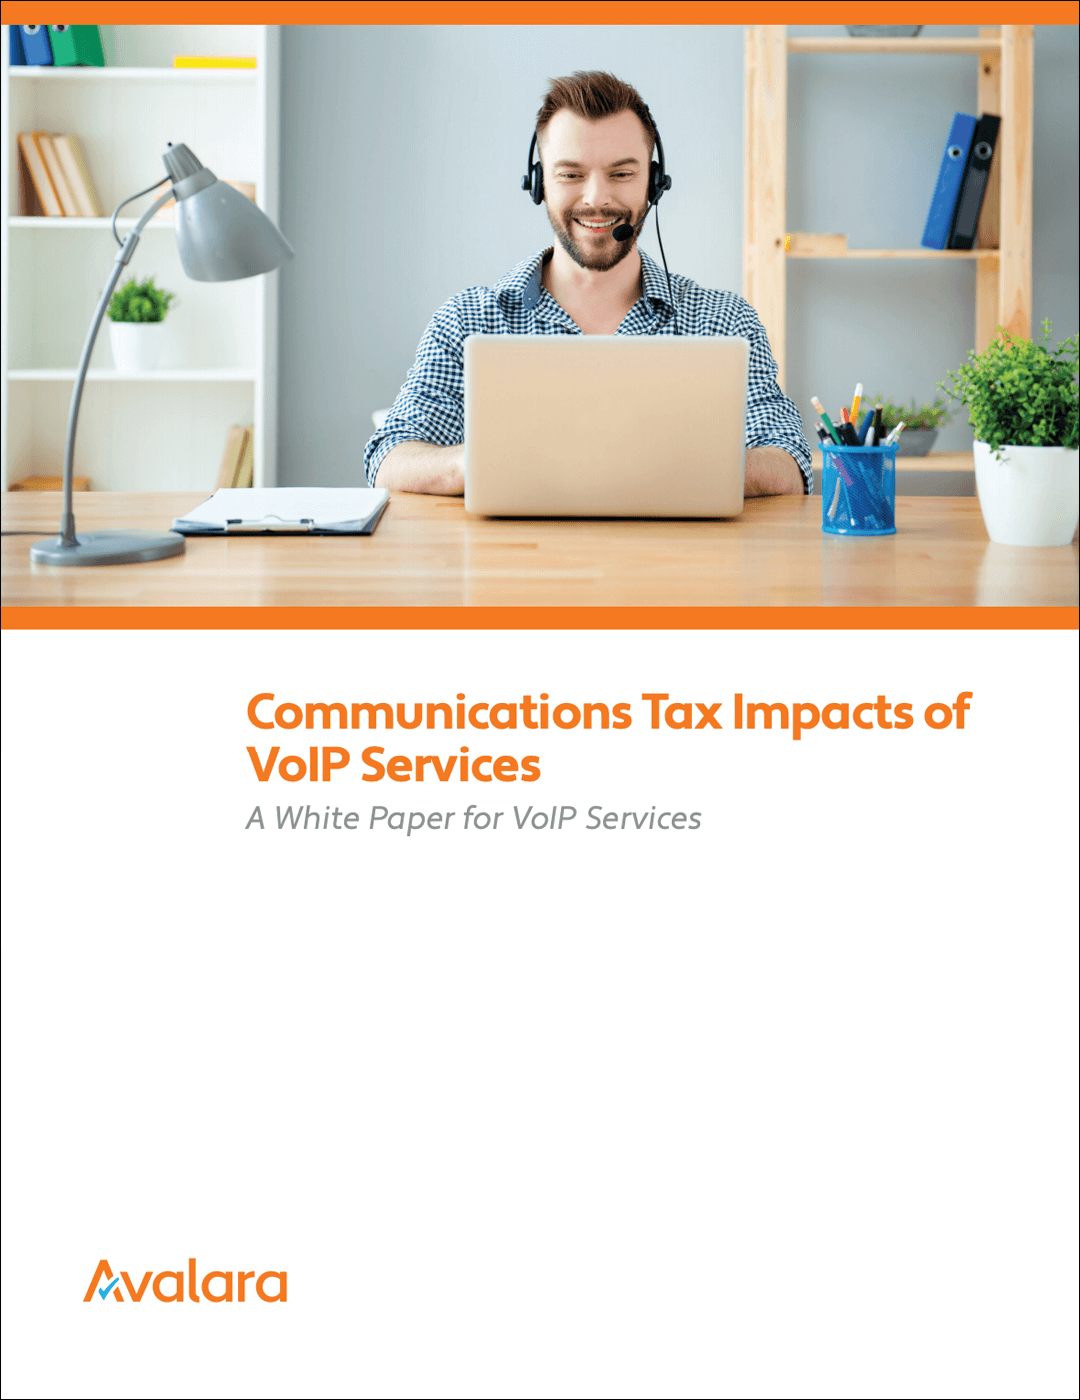 Communications Tax Impacts of VoIP Services